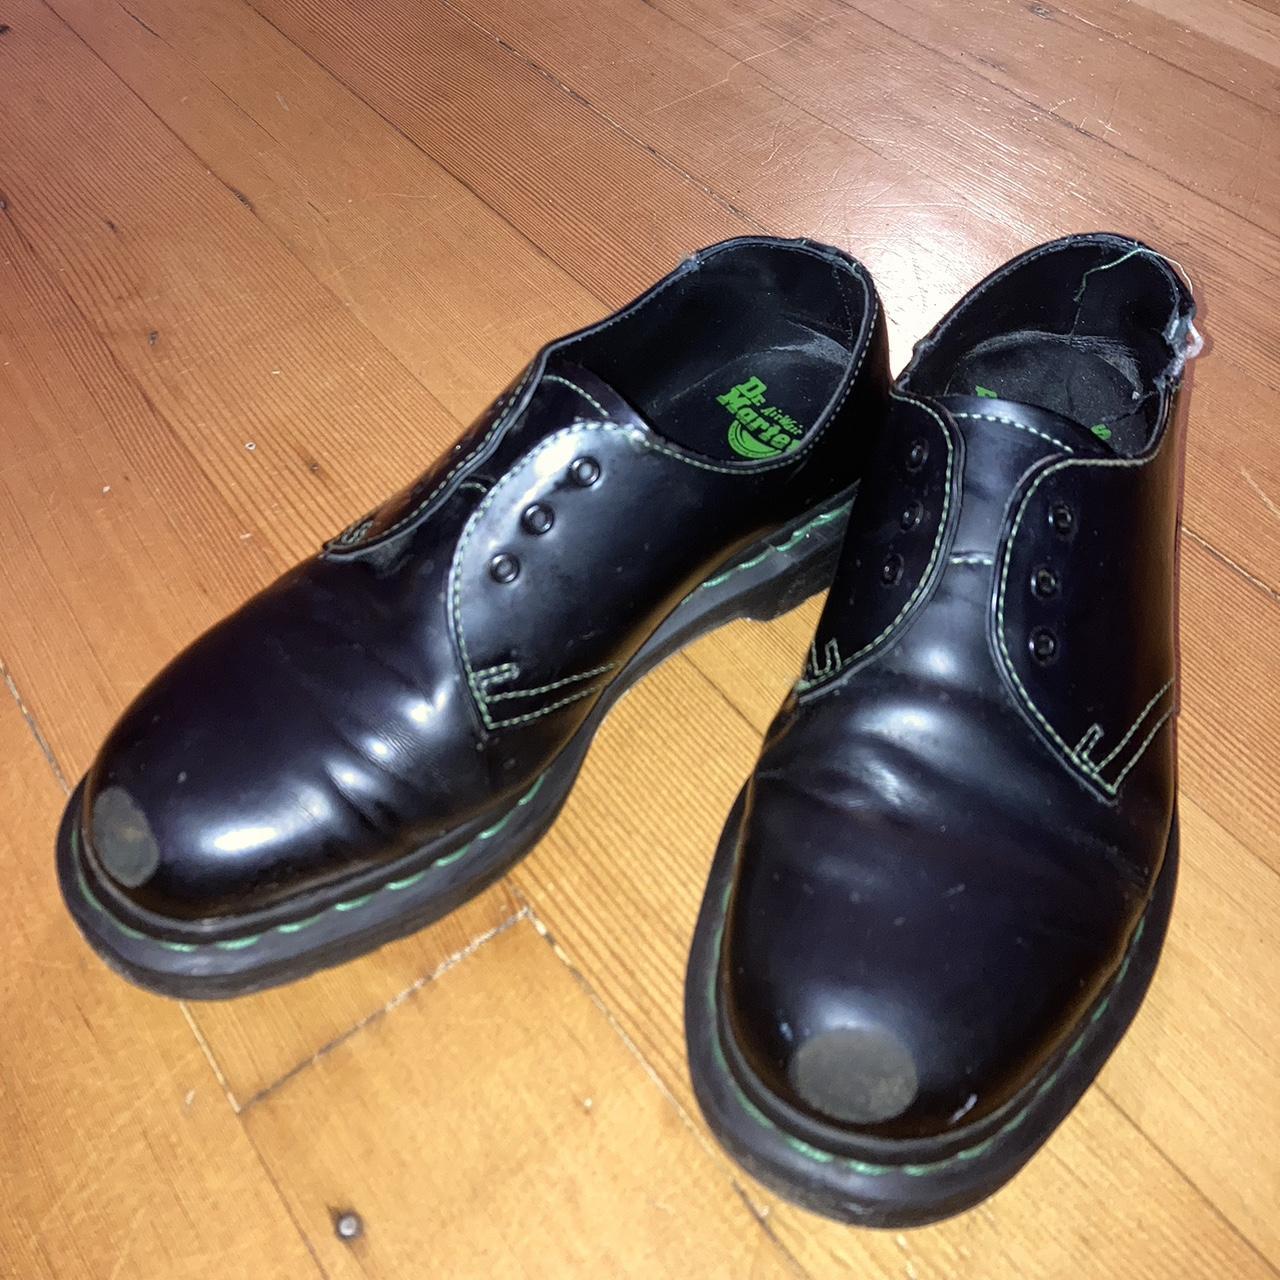 Dr. Martens Women's Black and Green Oxfords (4)